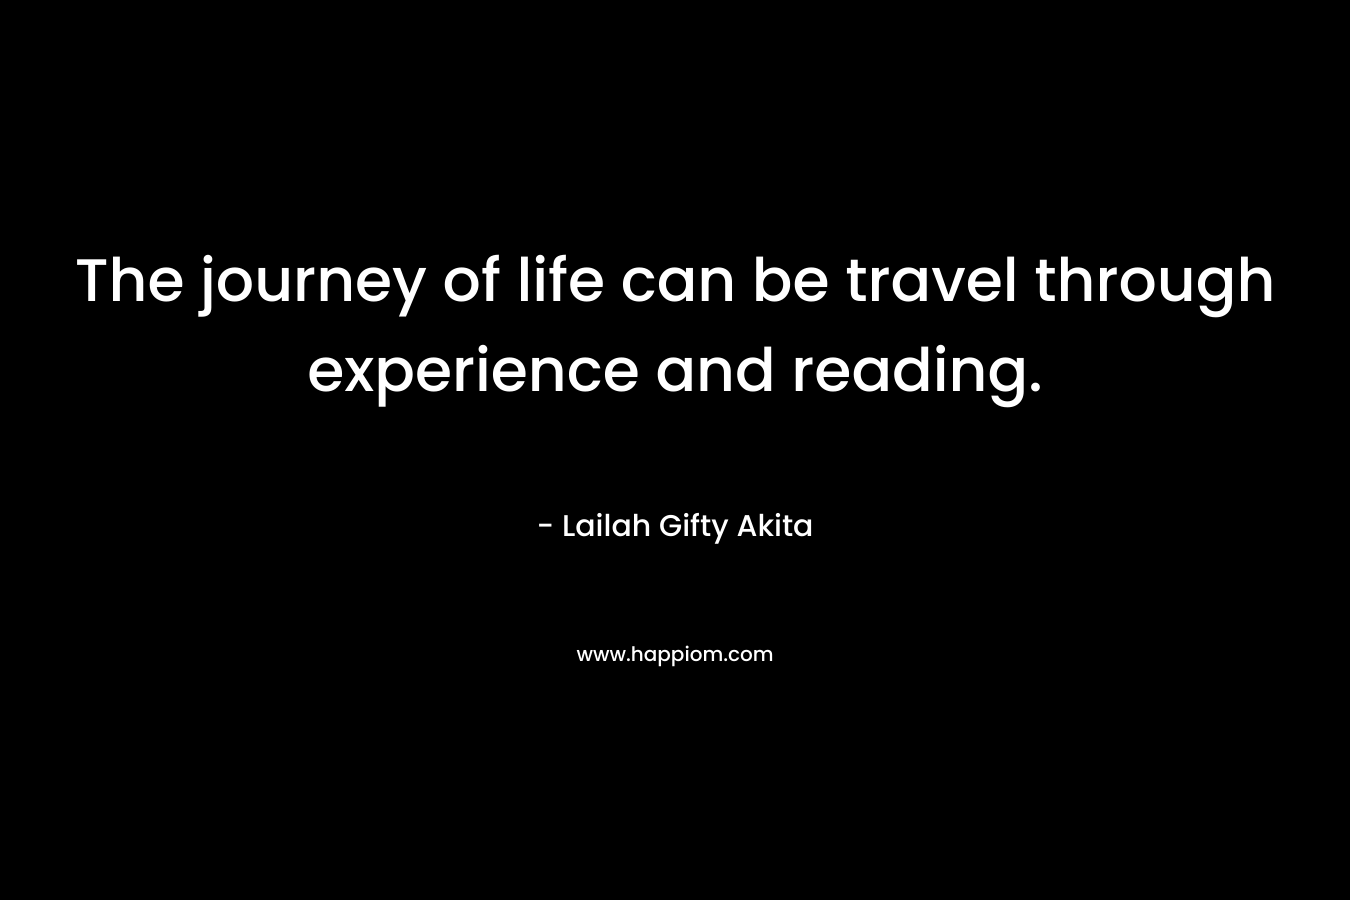 The journey of life can be travel through experience and reading.